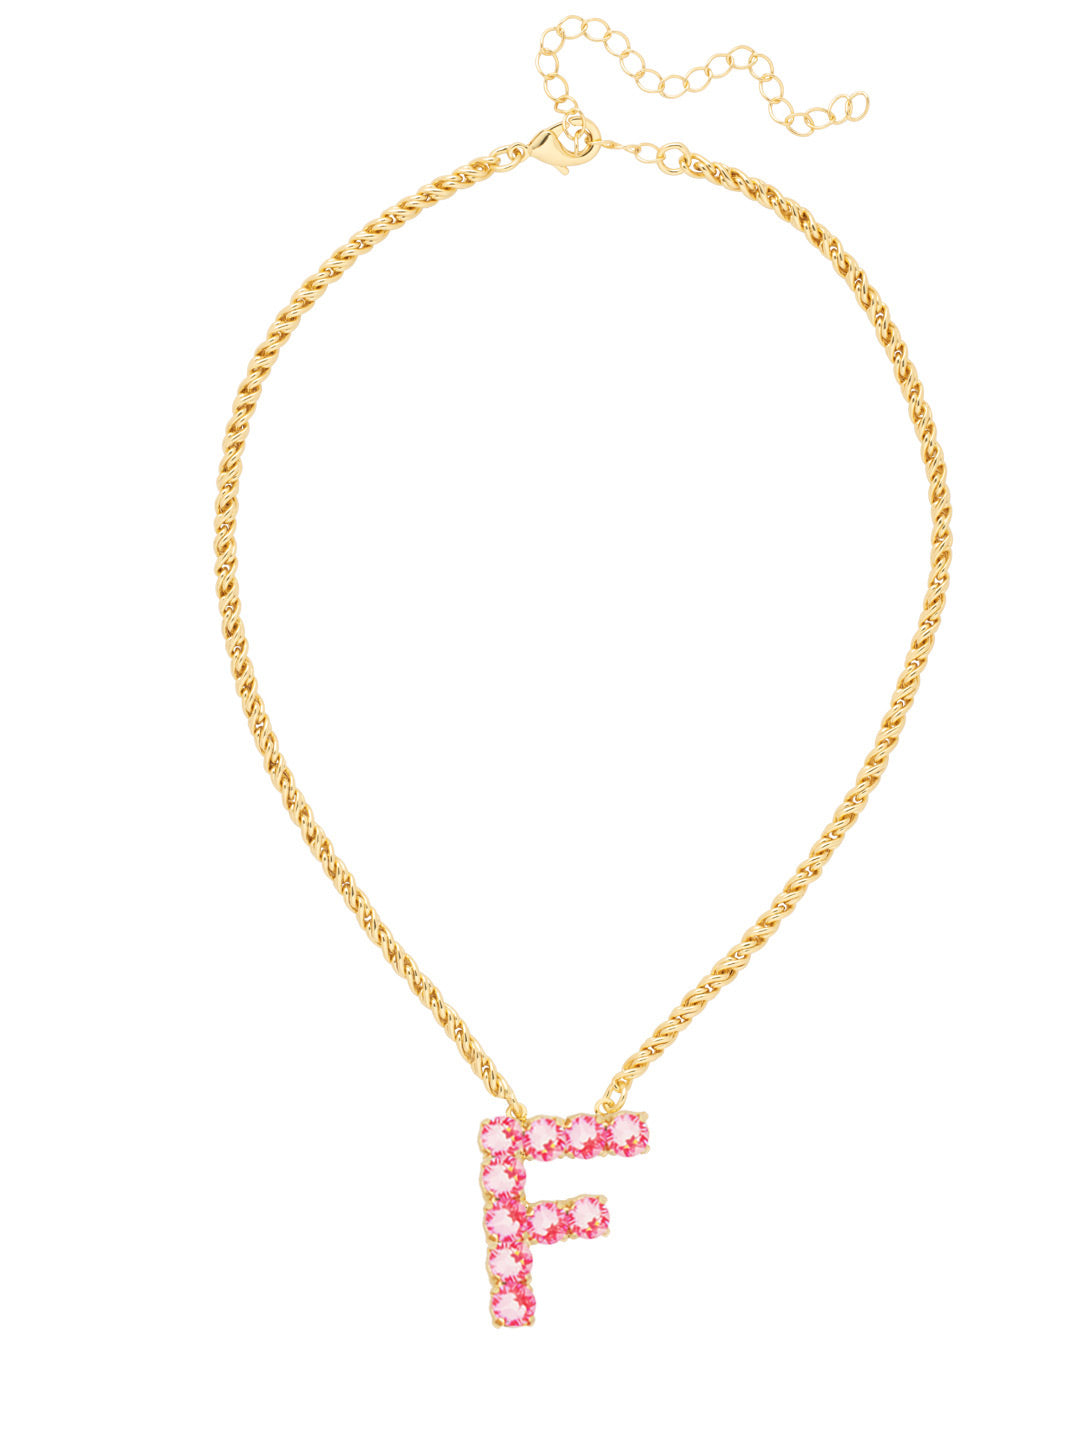 F Initial Rope Pendant Necklace - NFK25BGETP - <p>The Initial Rope Pendant Necklace features a crystal encrusted metal monogram pendant on an adjustable rope chain, secured with a lobster claw clasp. From Sorrelli's Electric Pink collection in our Bright Gold-tone finish.</p>